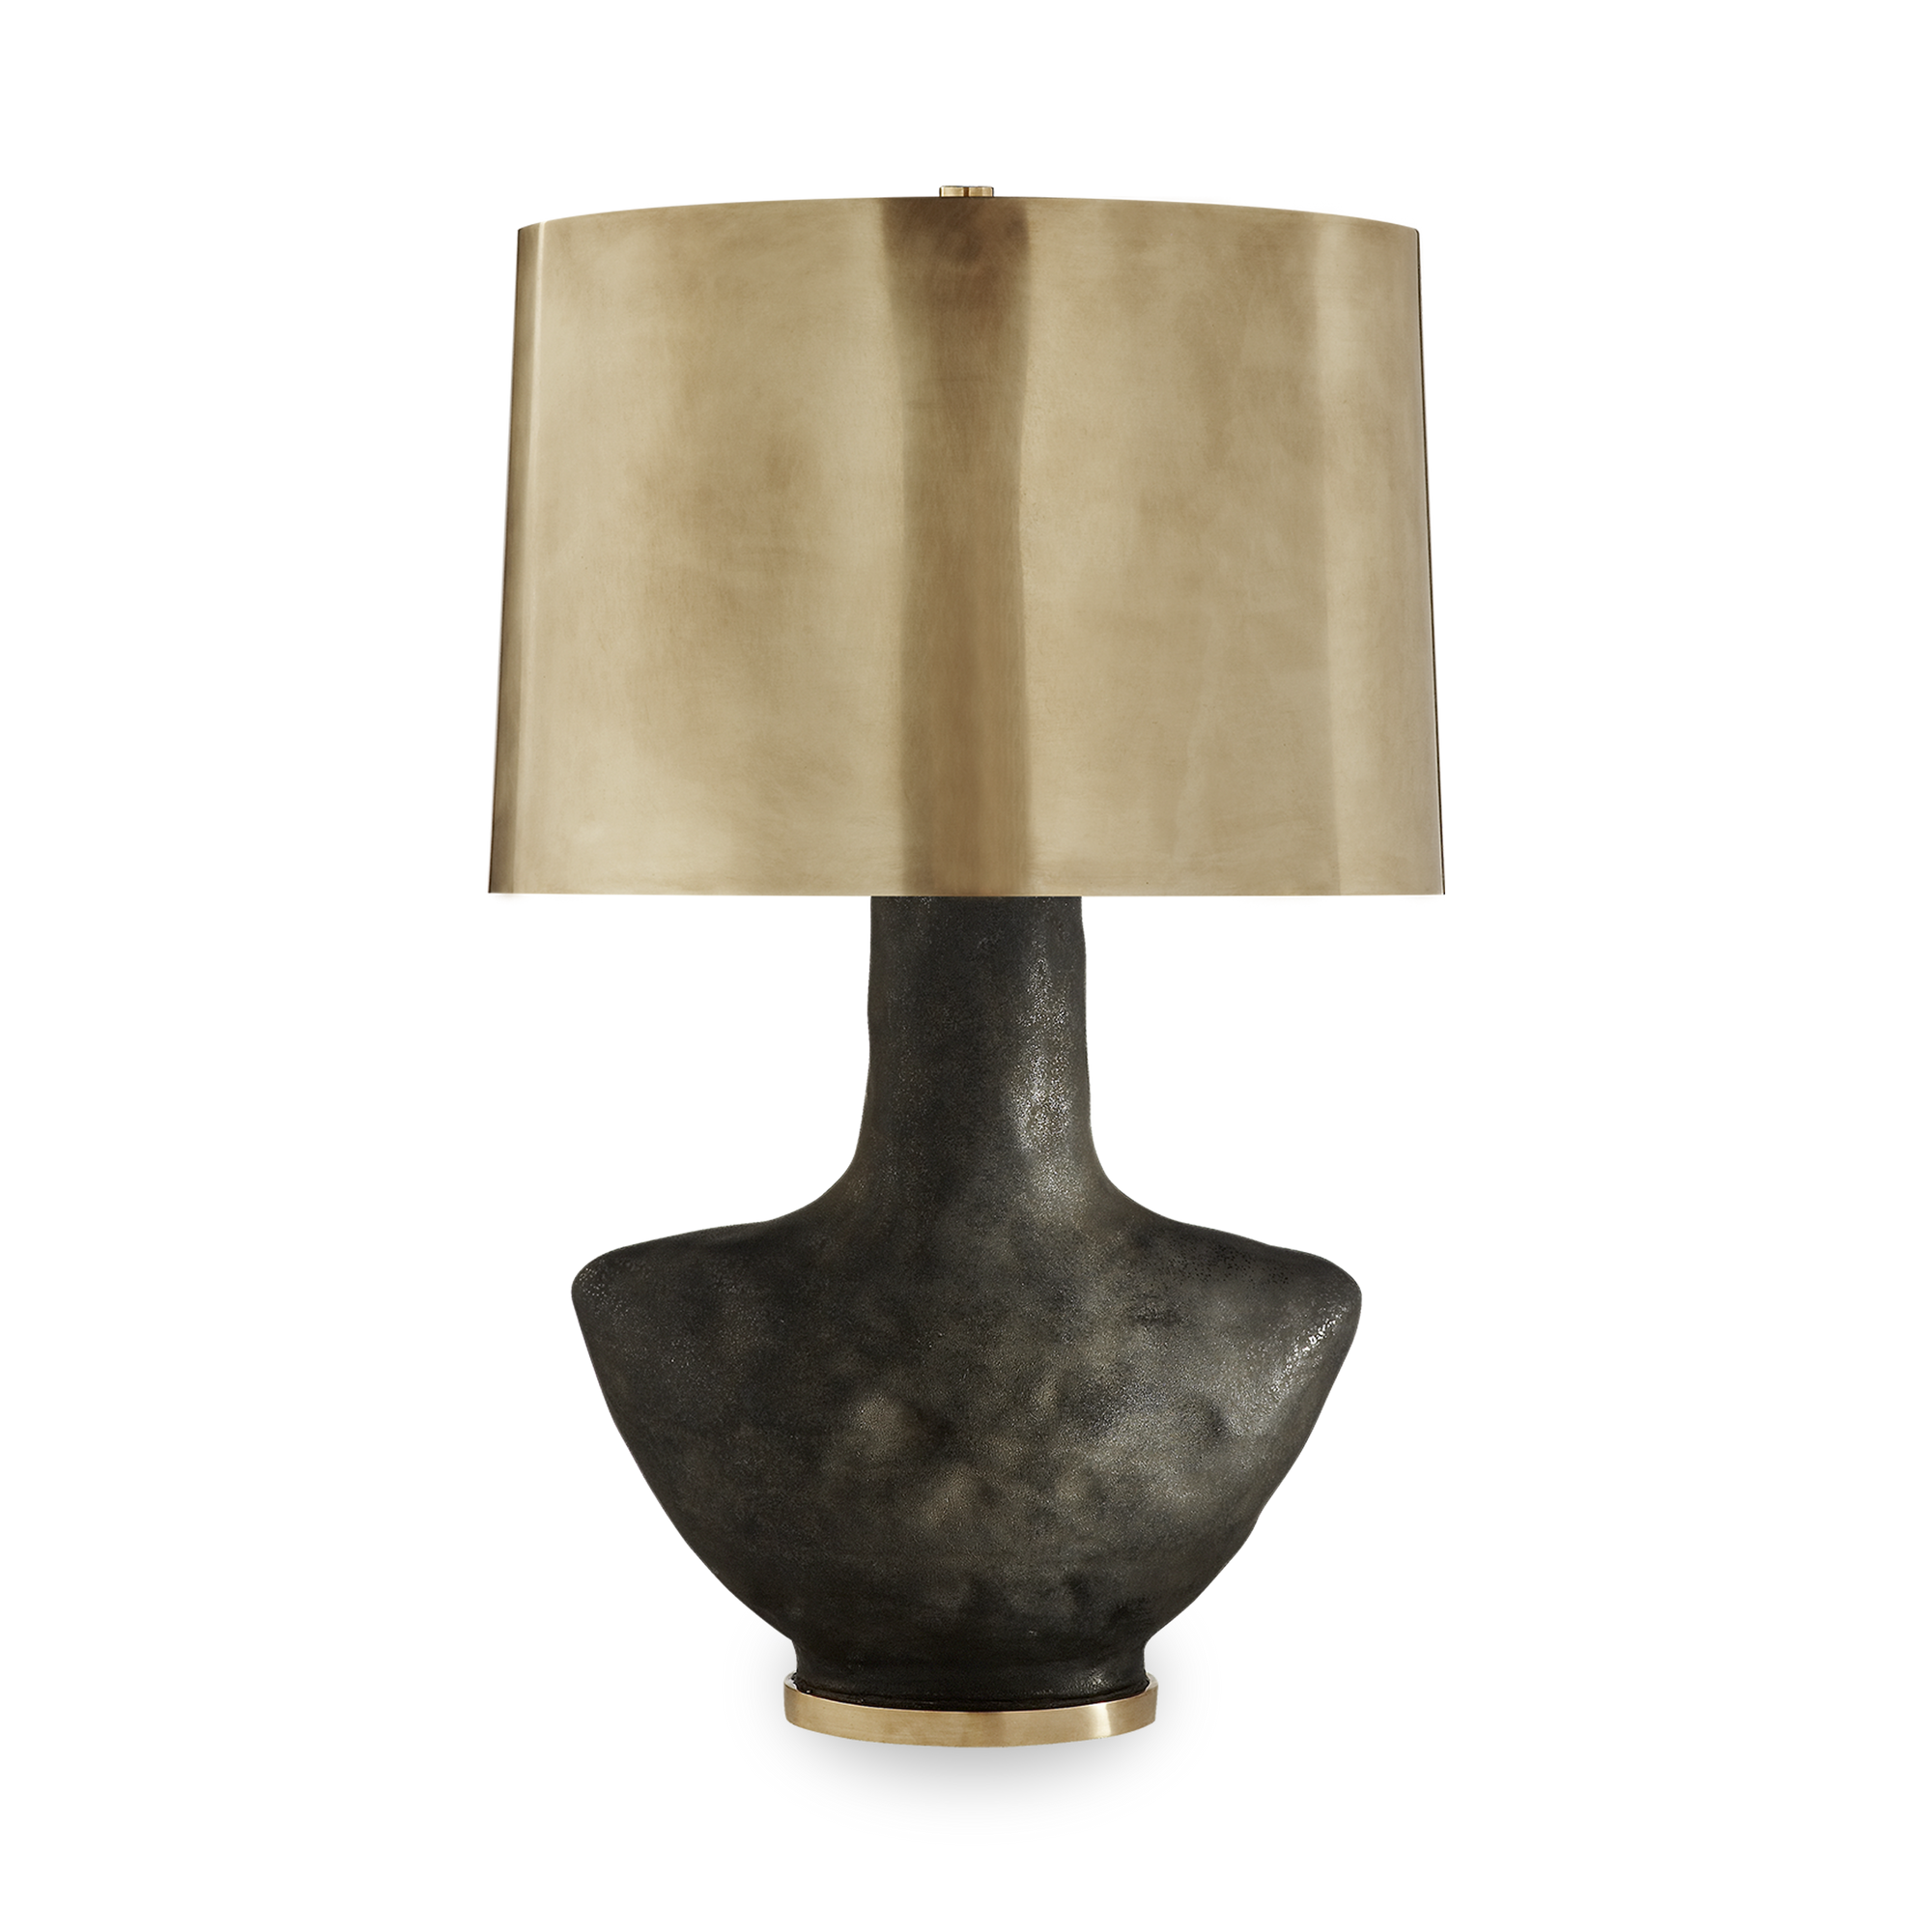 The Armato Small Table Lamp features a distinctive design and  soulful vibe.